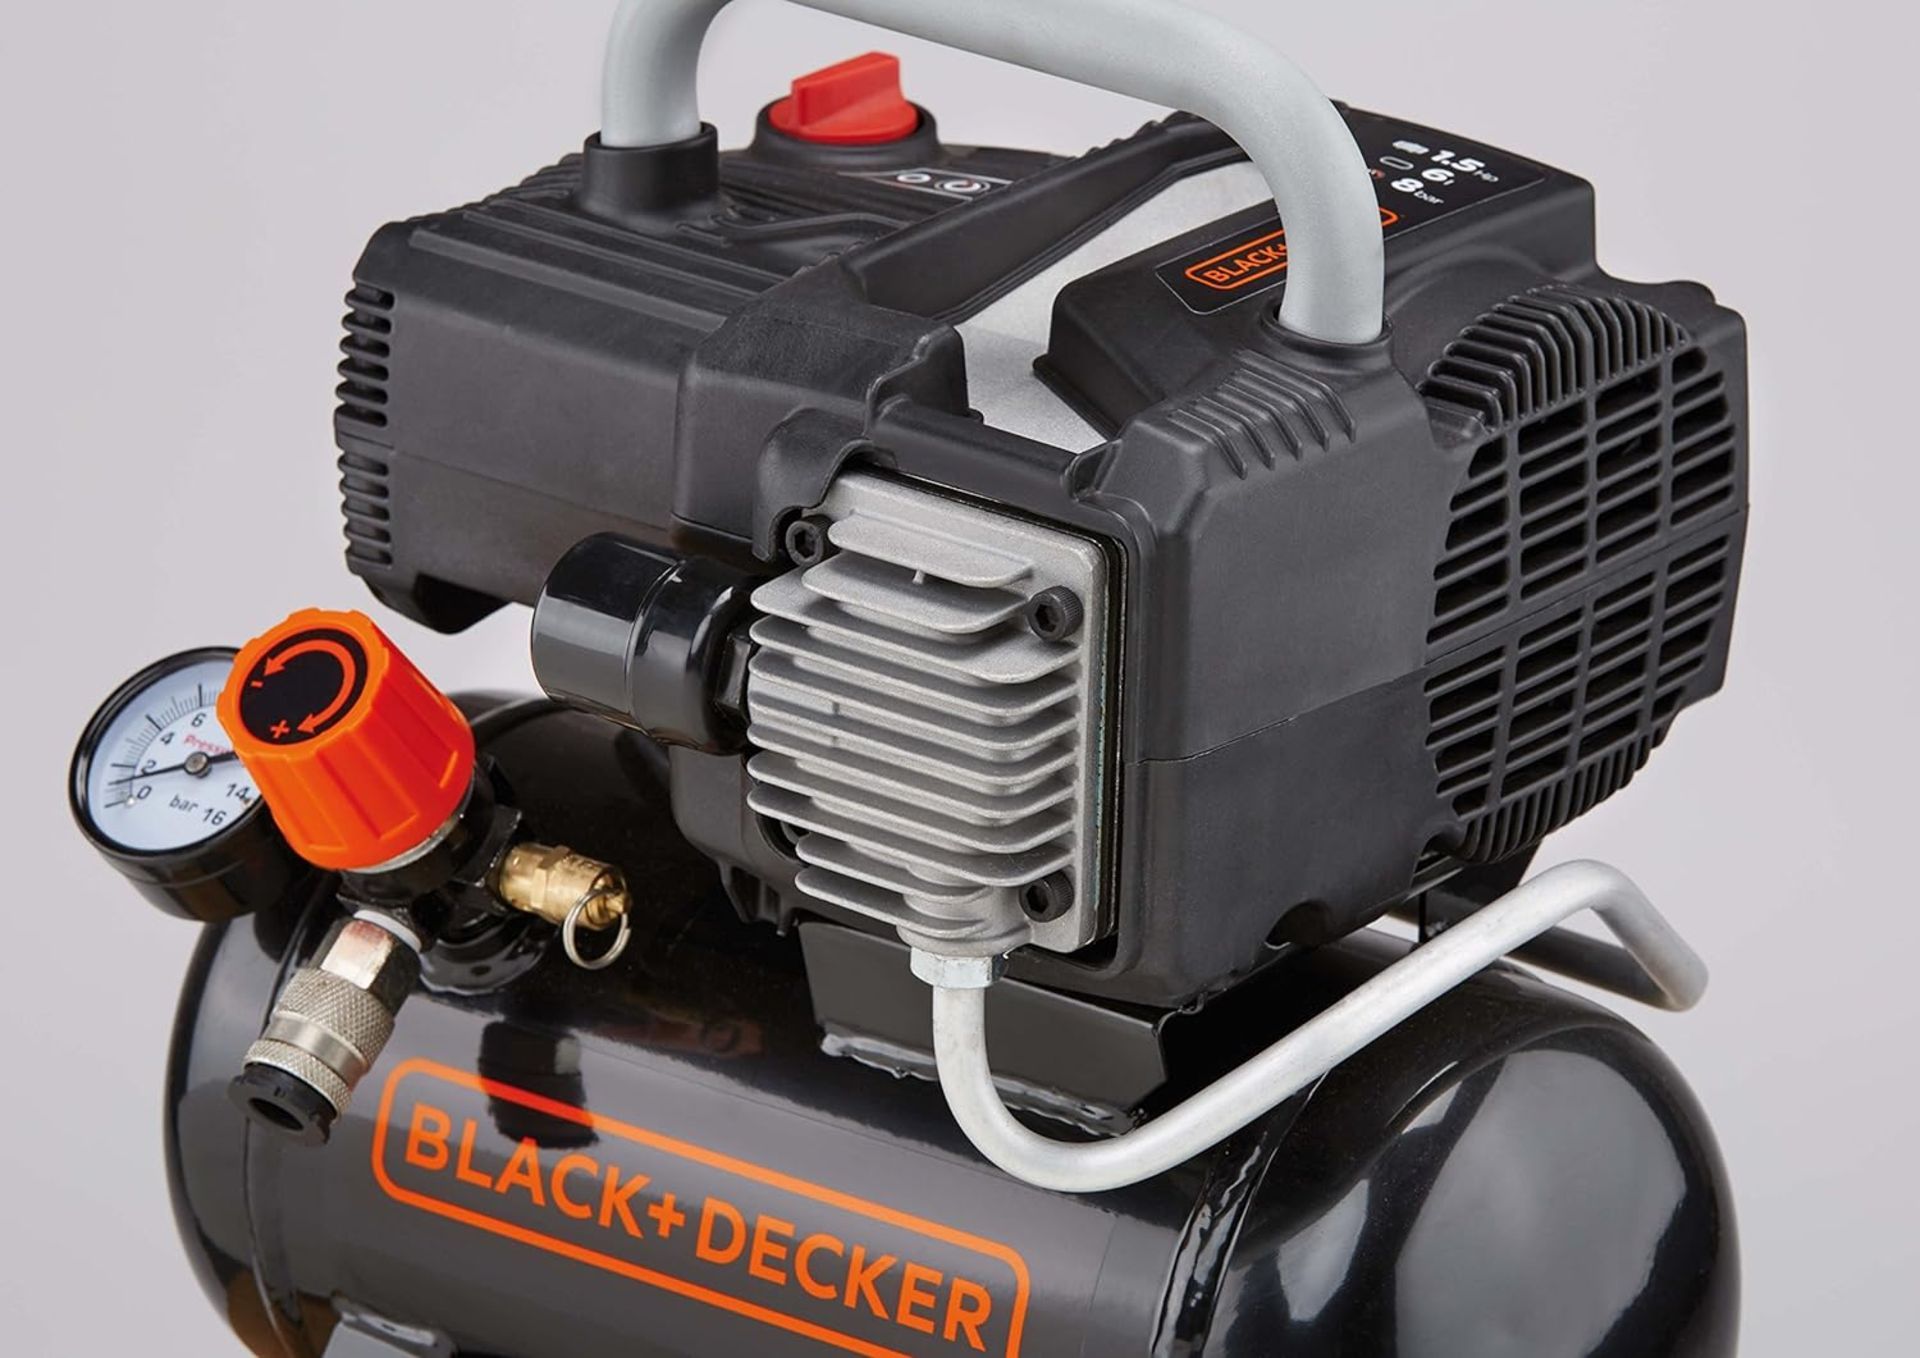 Brand New Black + Decker 195/6 NK Air Compressor, Tank capacity: 6 liters Intended Use: Inflatable - Image 2 of 3